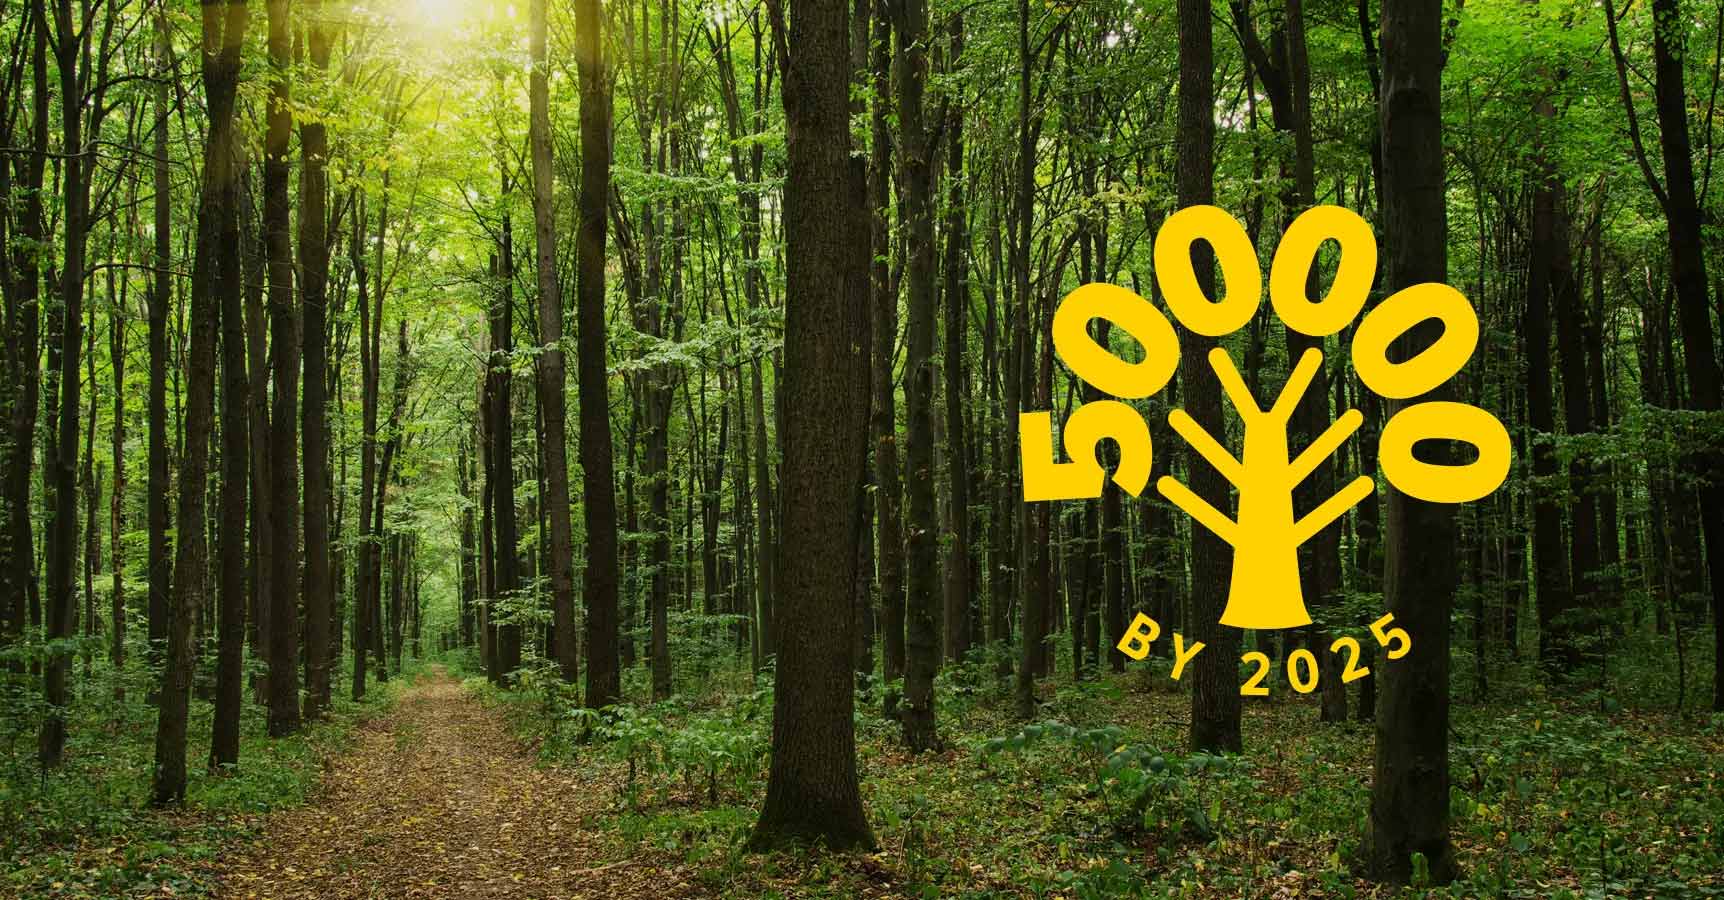 We pledge to plant 500,000 trees globally by 2025